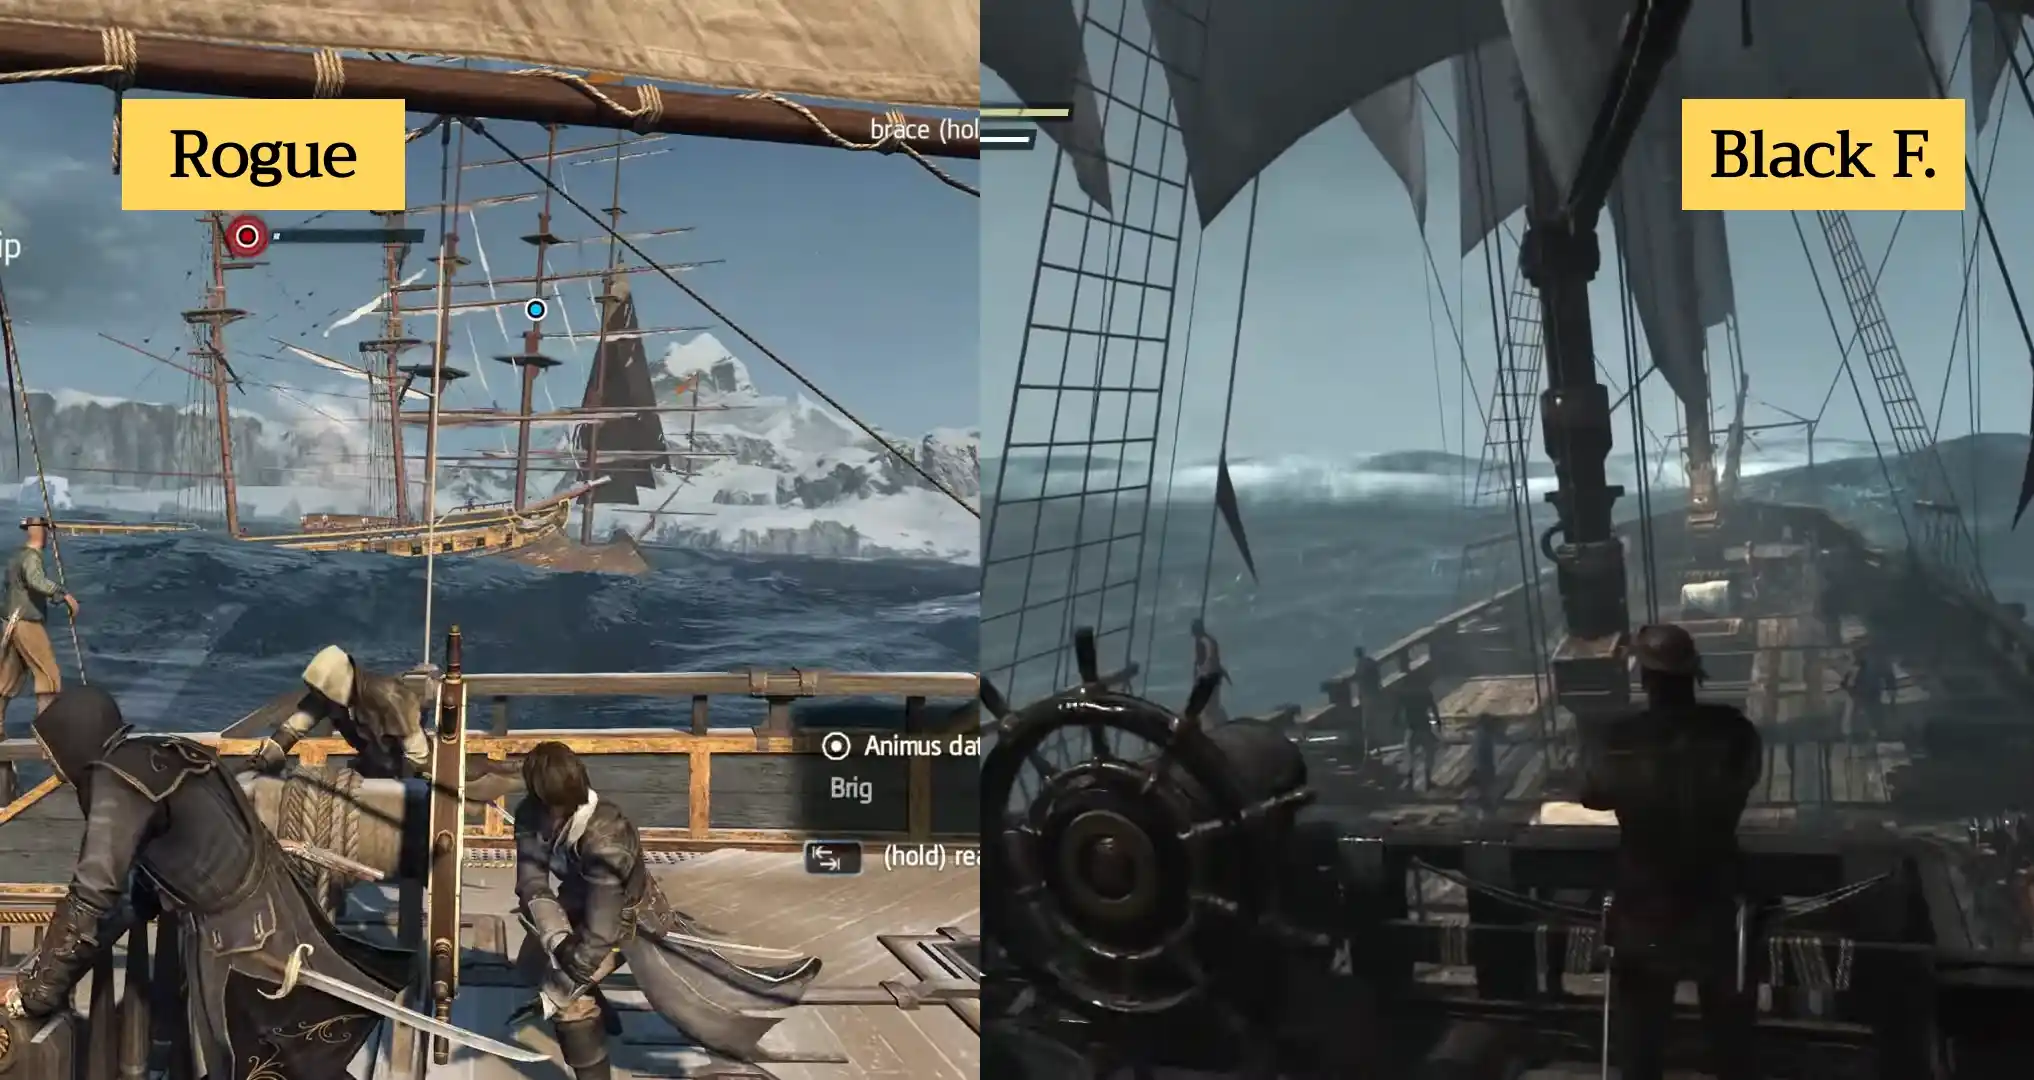 Direct comparison of Rogue and Black Flag